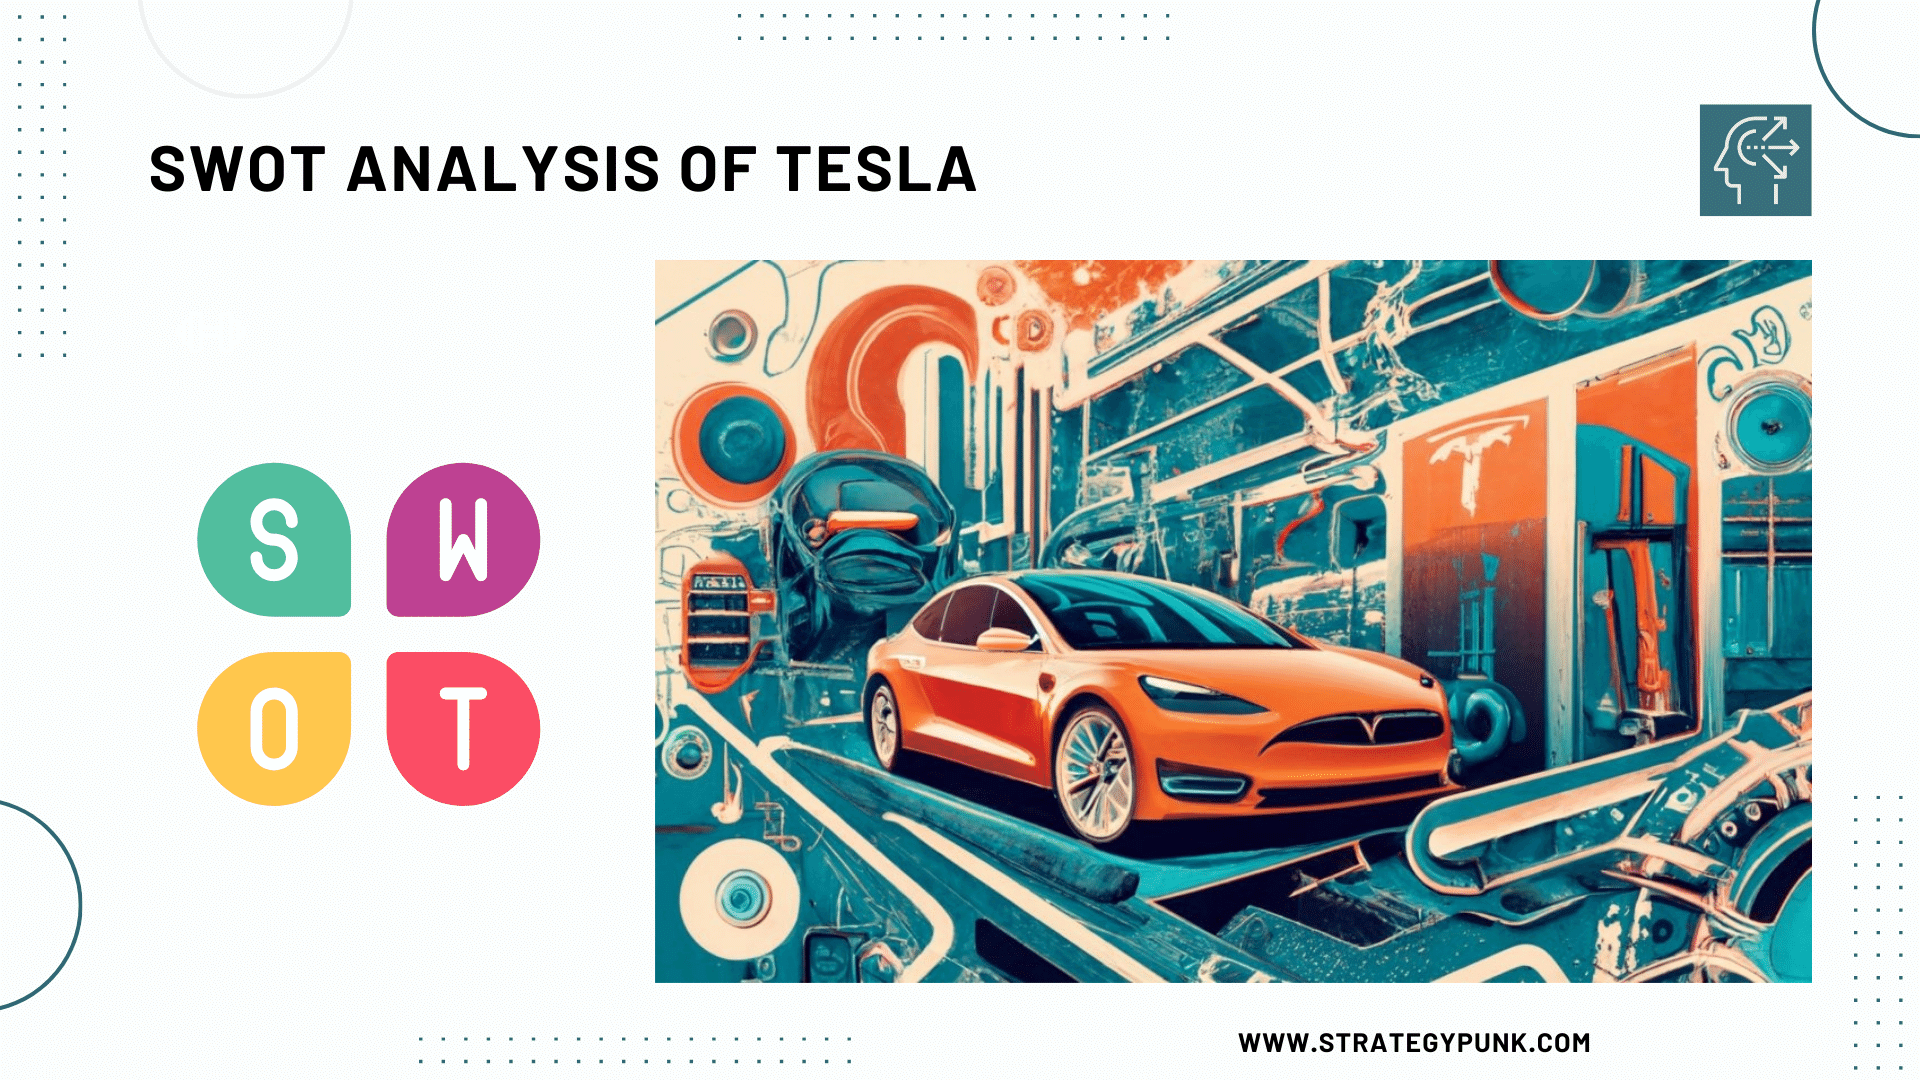 SWOT Analysis of Tesla: Free Templates and In-Depth Insights 2023